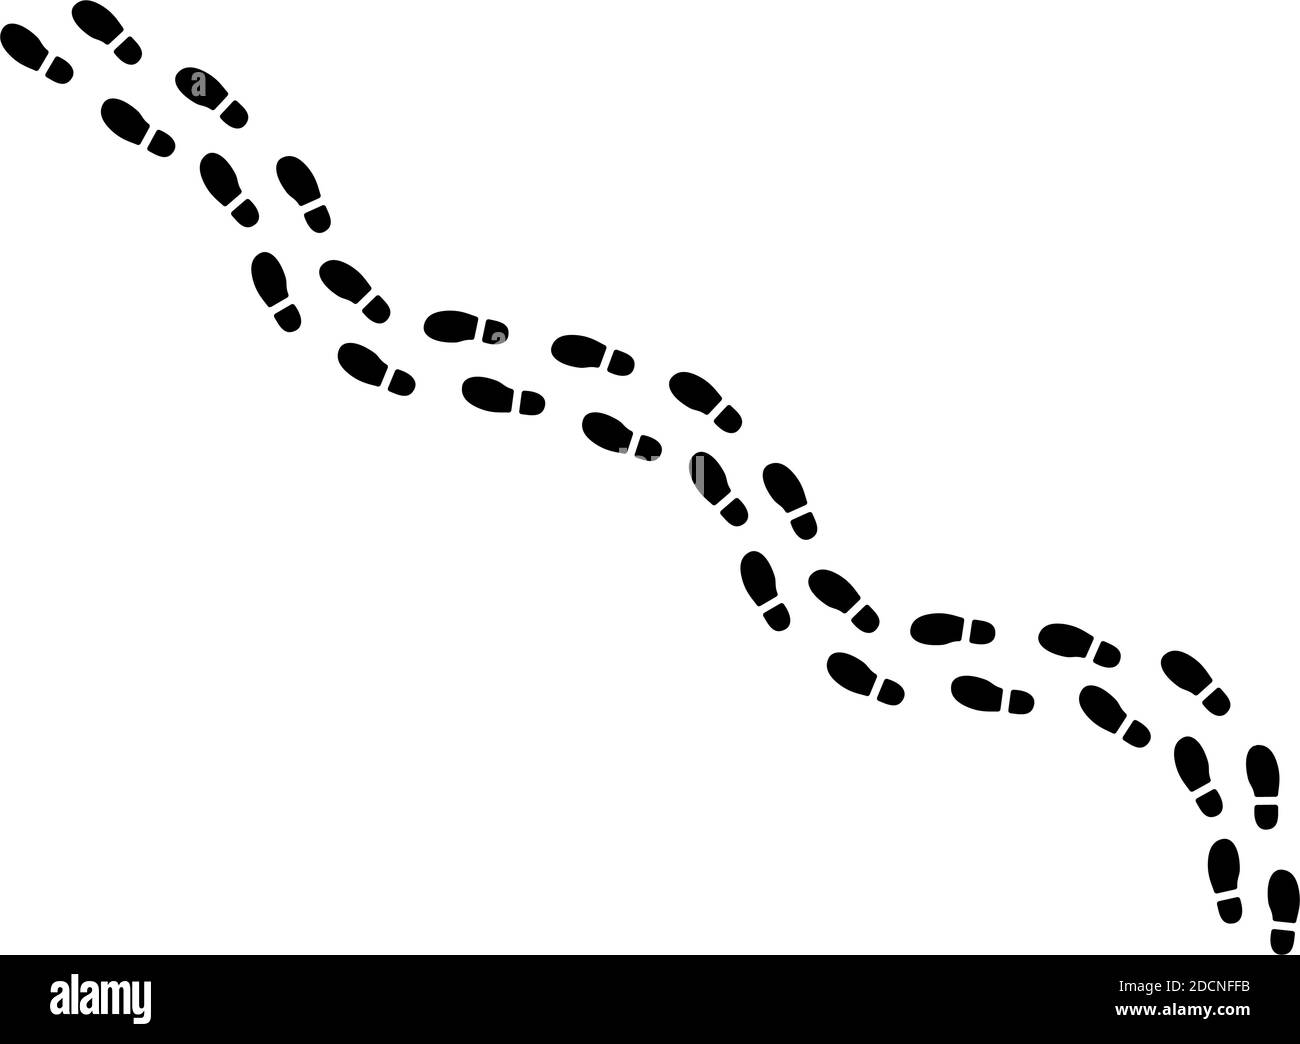 Human shoe sole footprint footpath silhouettes vector illustration Stock Vector